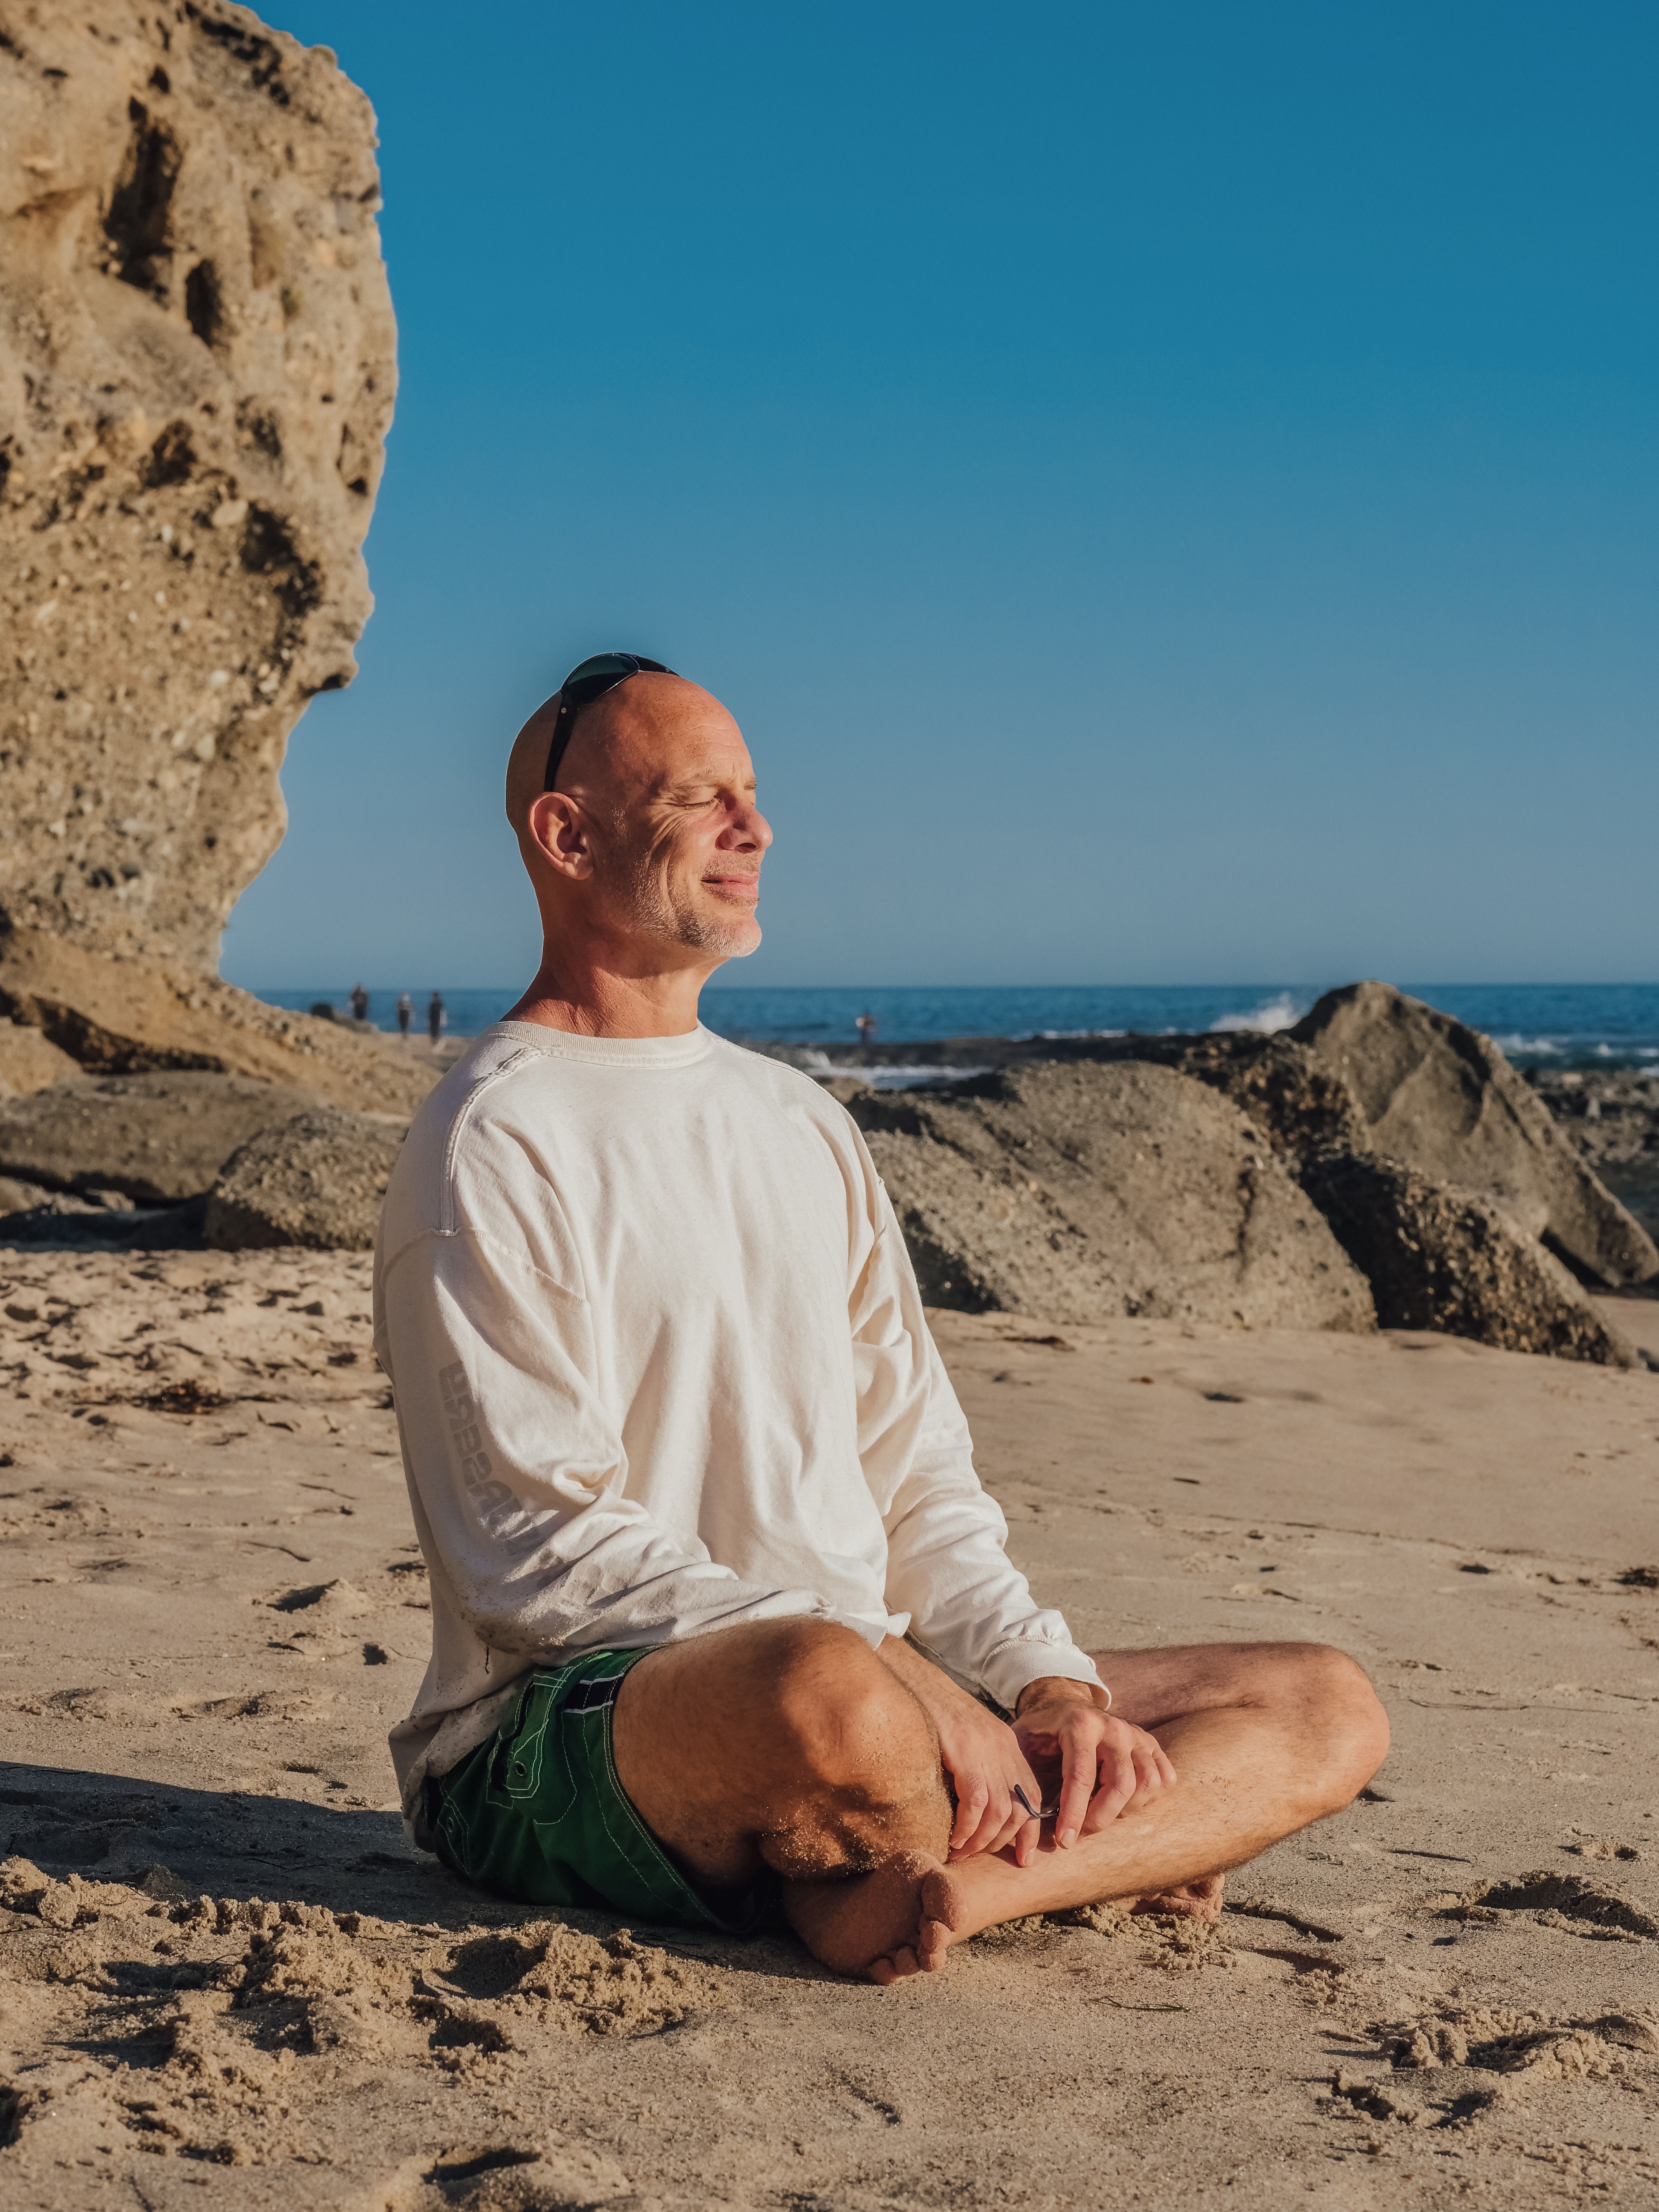 middle aged man sitting in meditation on beach in long sleeved tee shirt and shorts